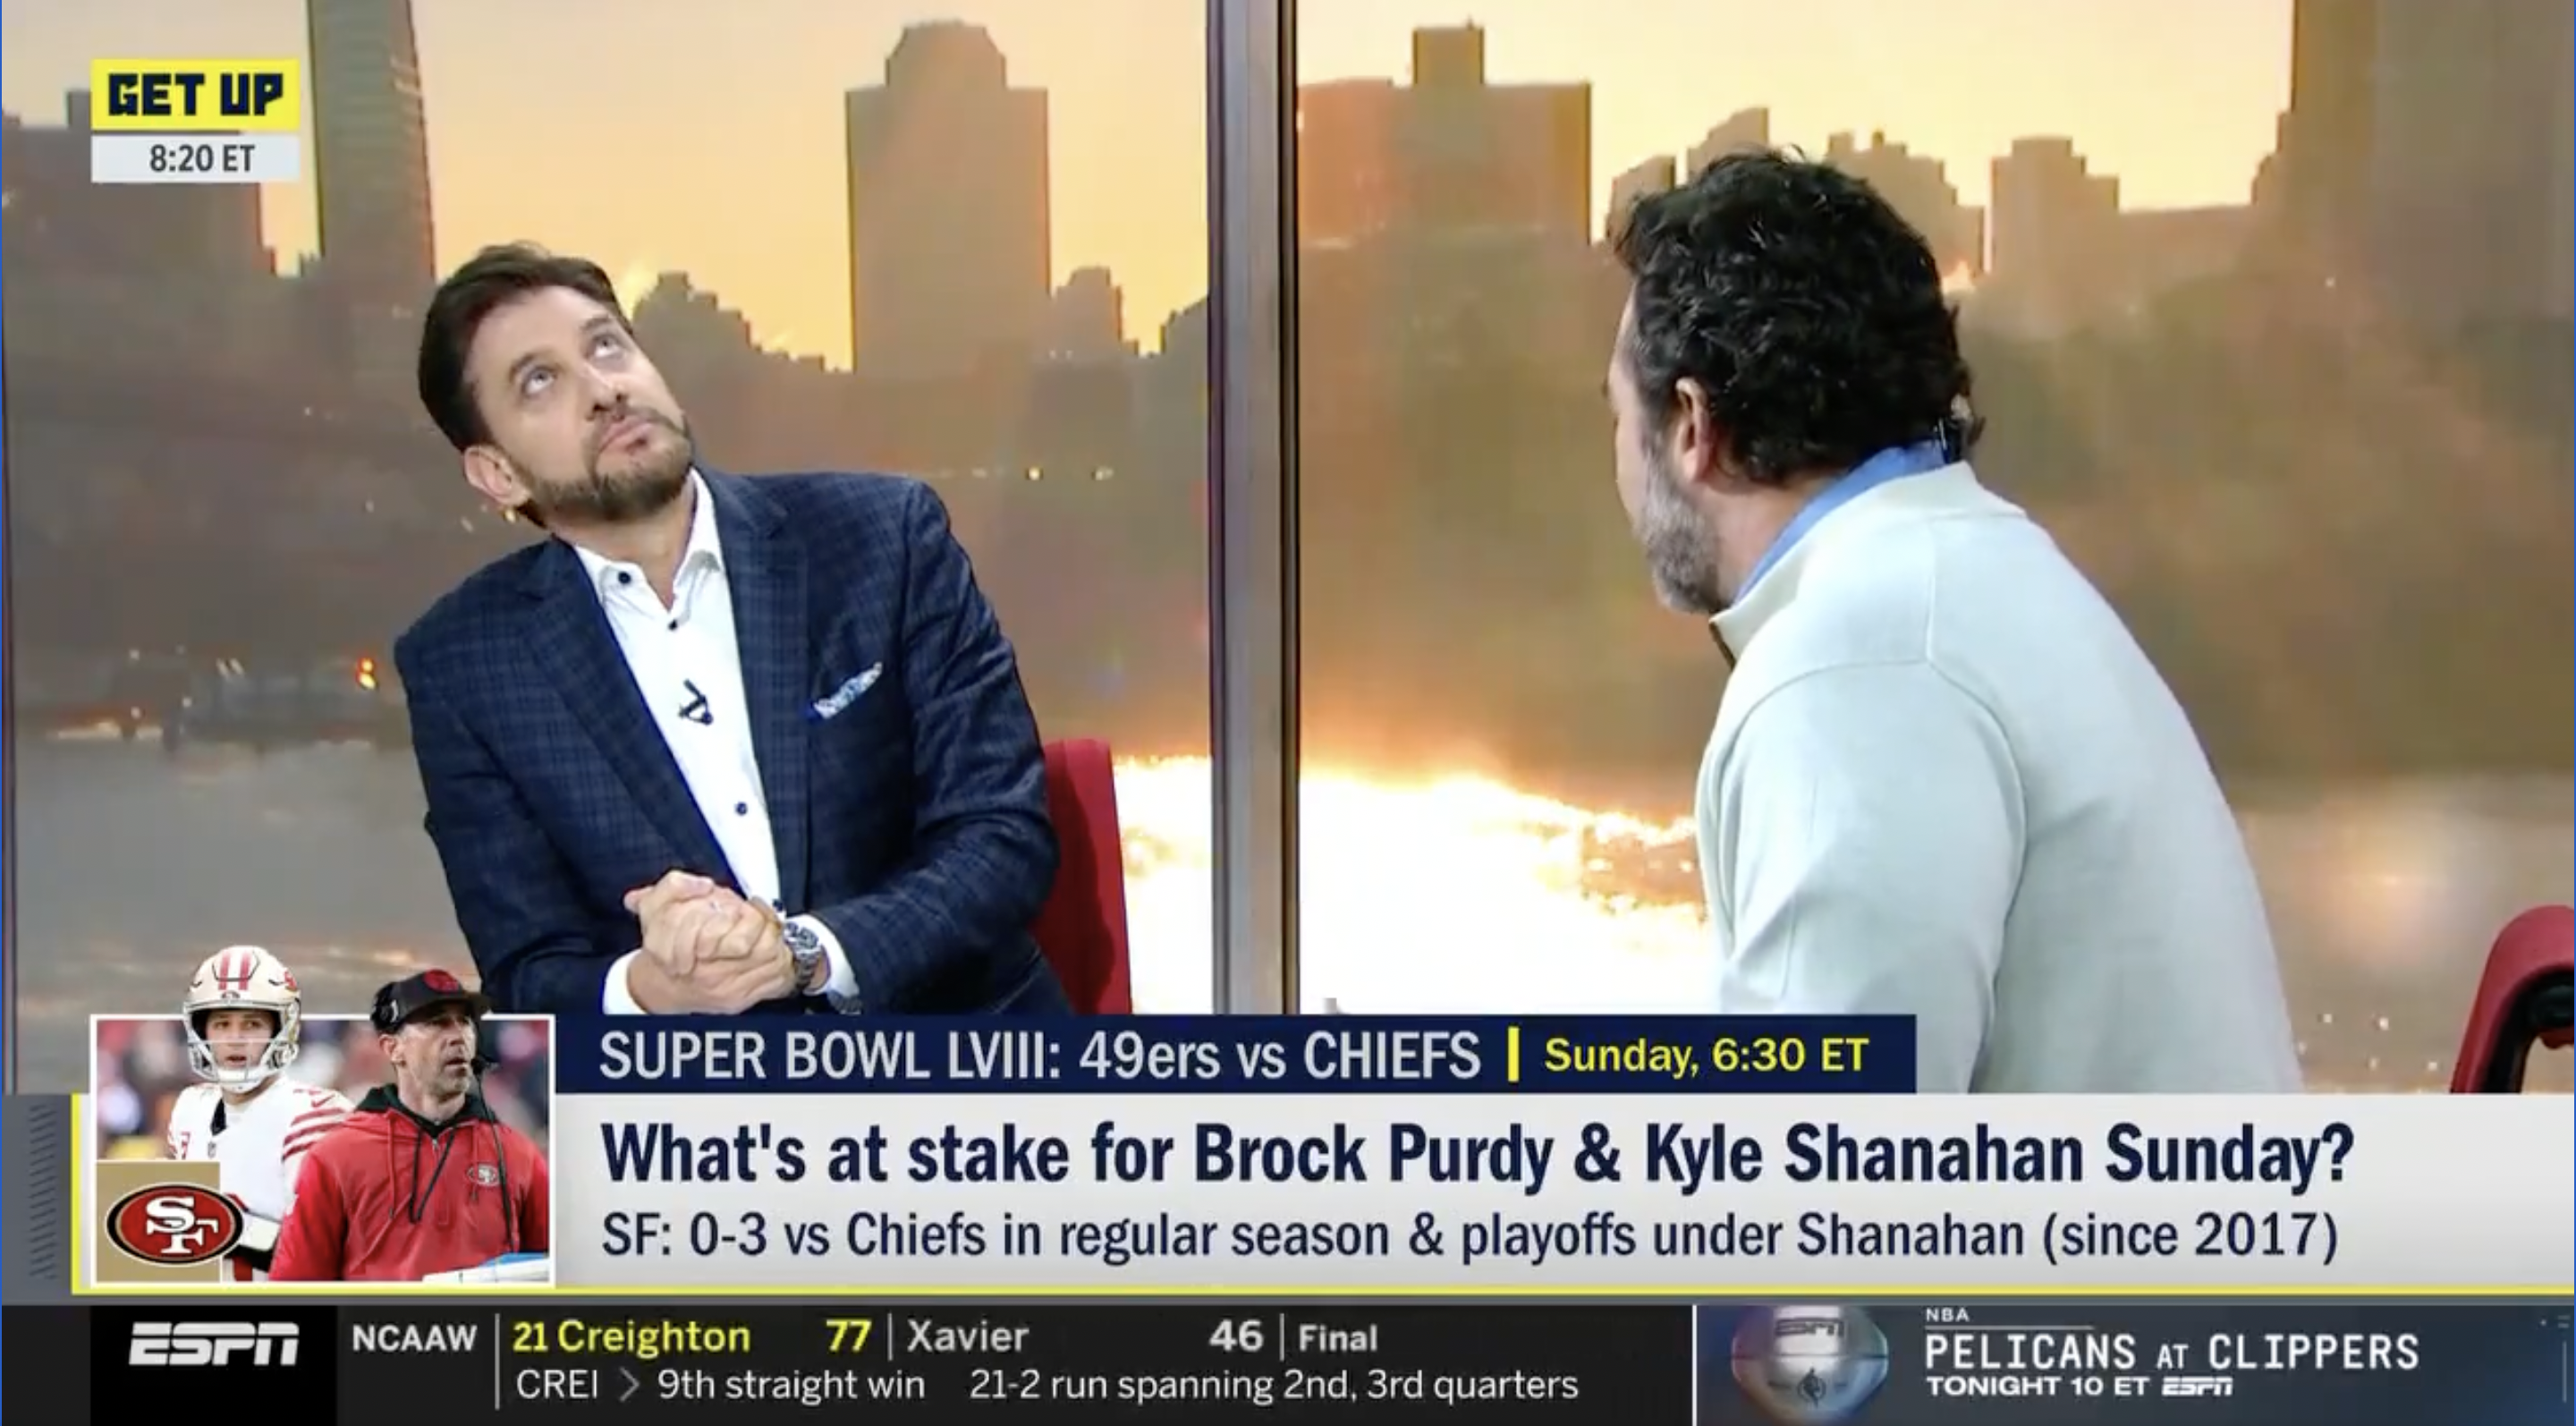 Mike Greenberg and Jeff Saturday clash over Brock Purdy on the set of ESPN's "Get Up."